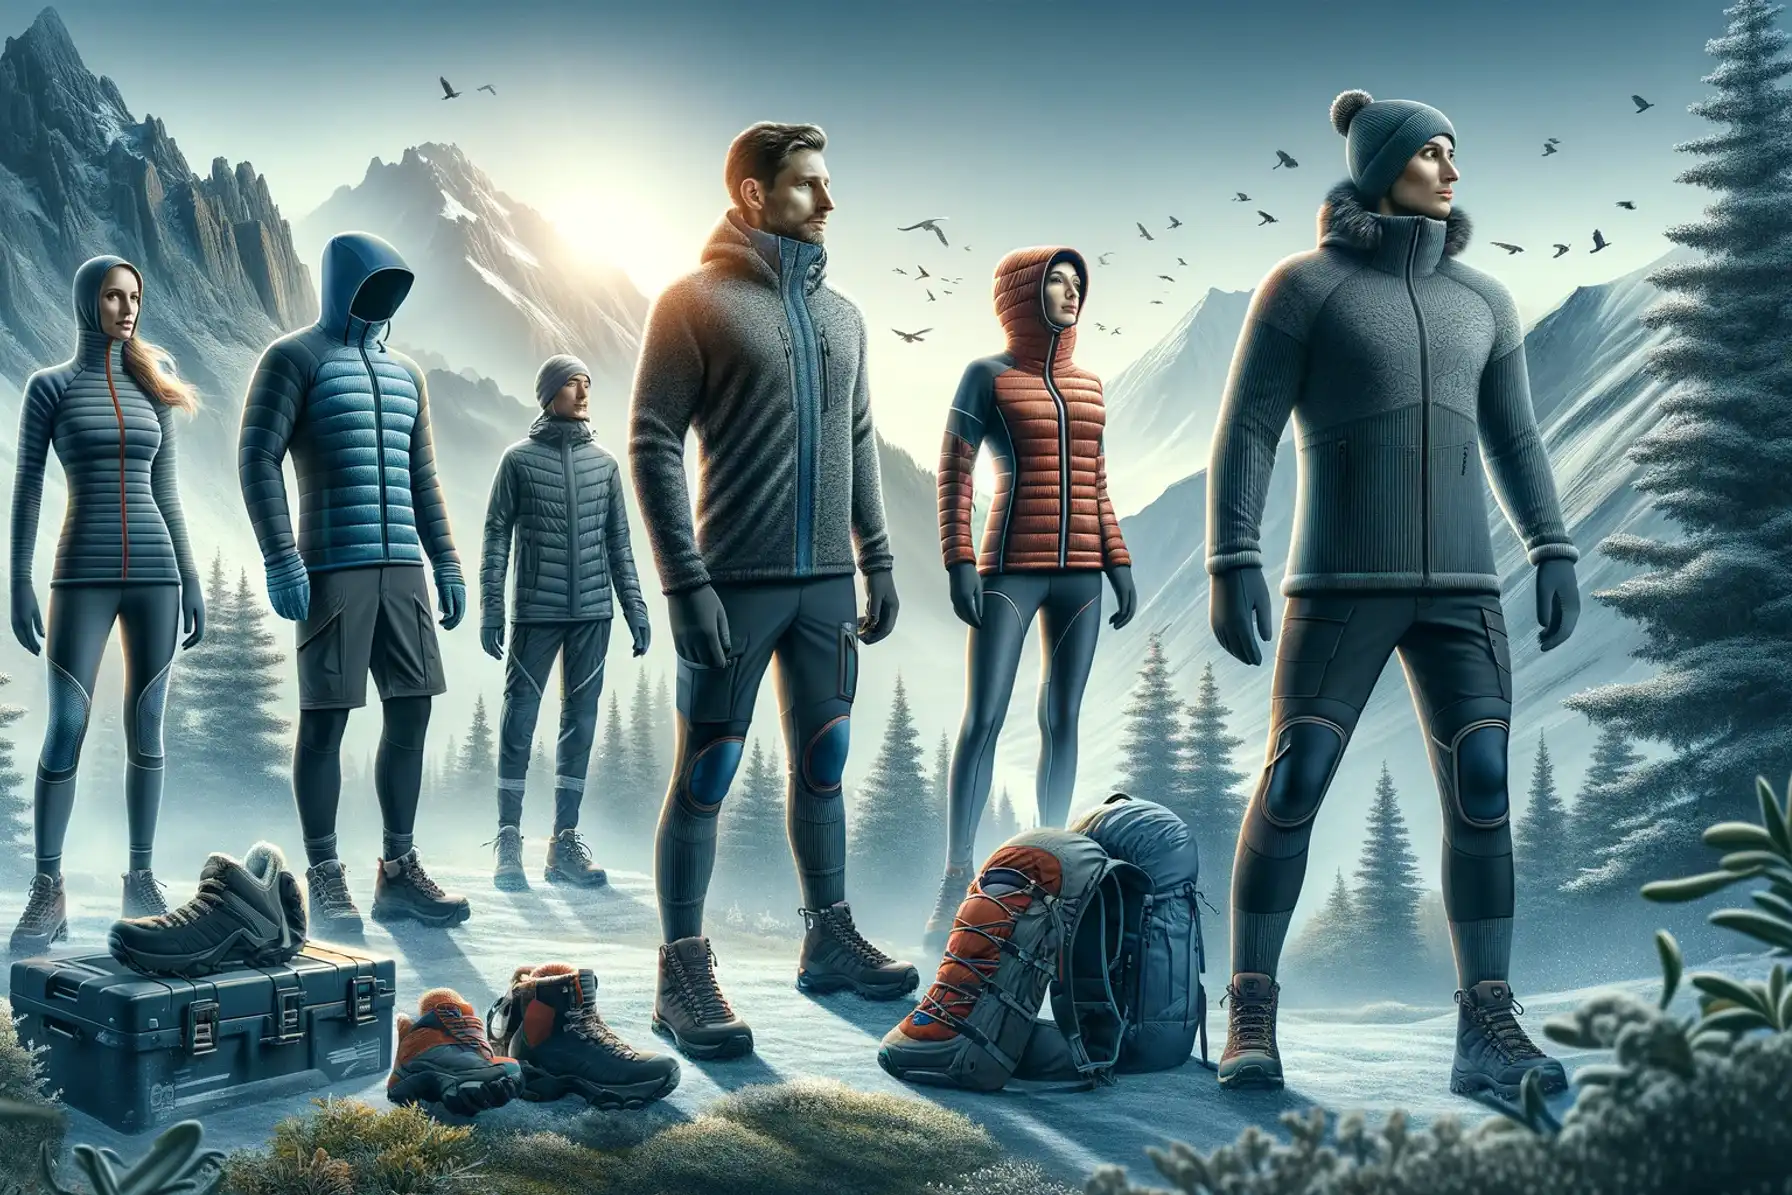 Outdoor Gear Guide: Layers To Keep You Comfy on Chilly Adventures